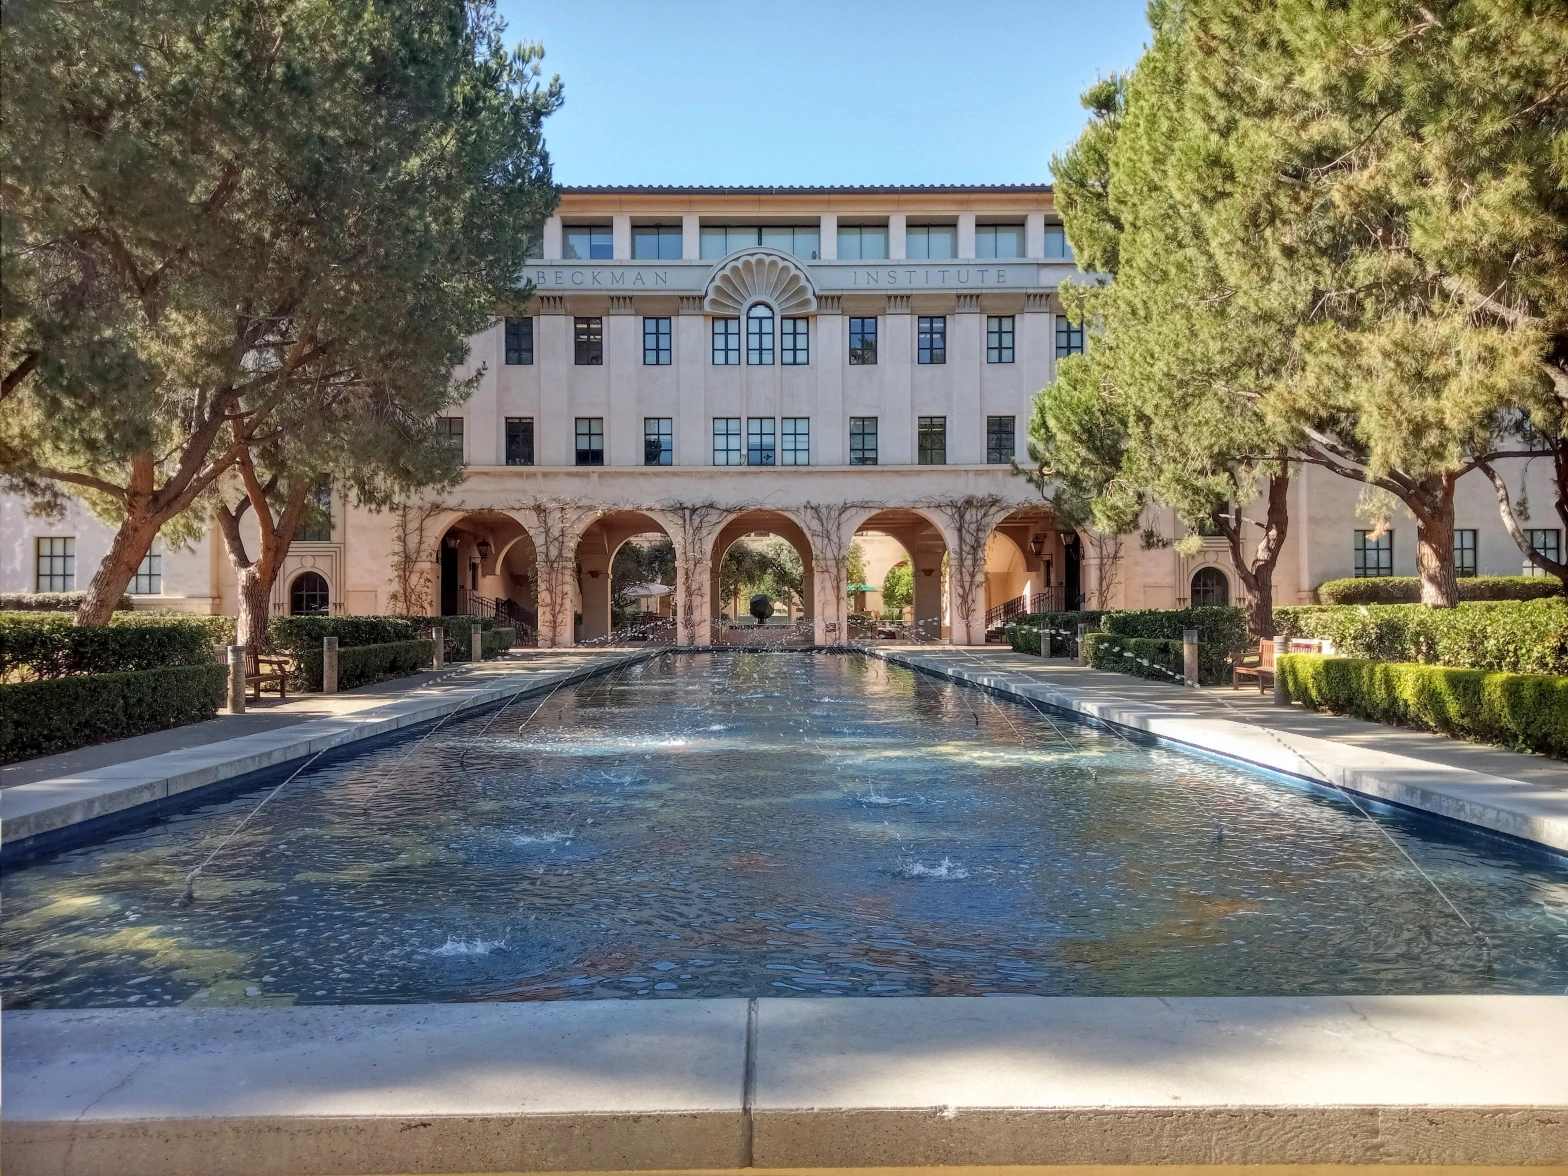 A Walking Tour of Caltech Transiting Los Angeles